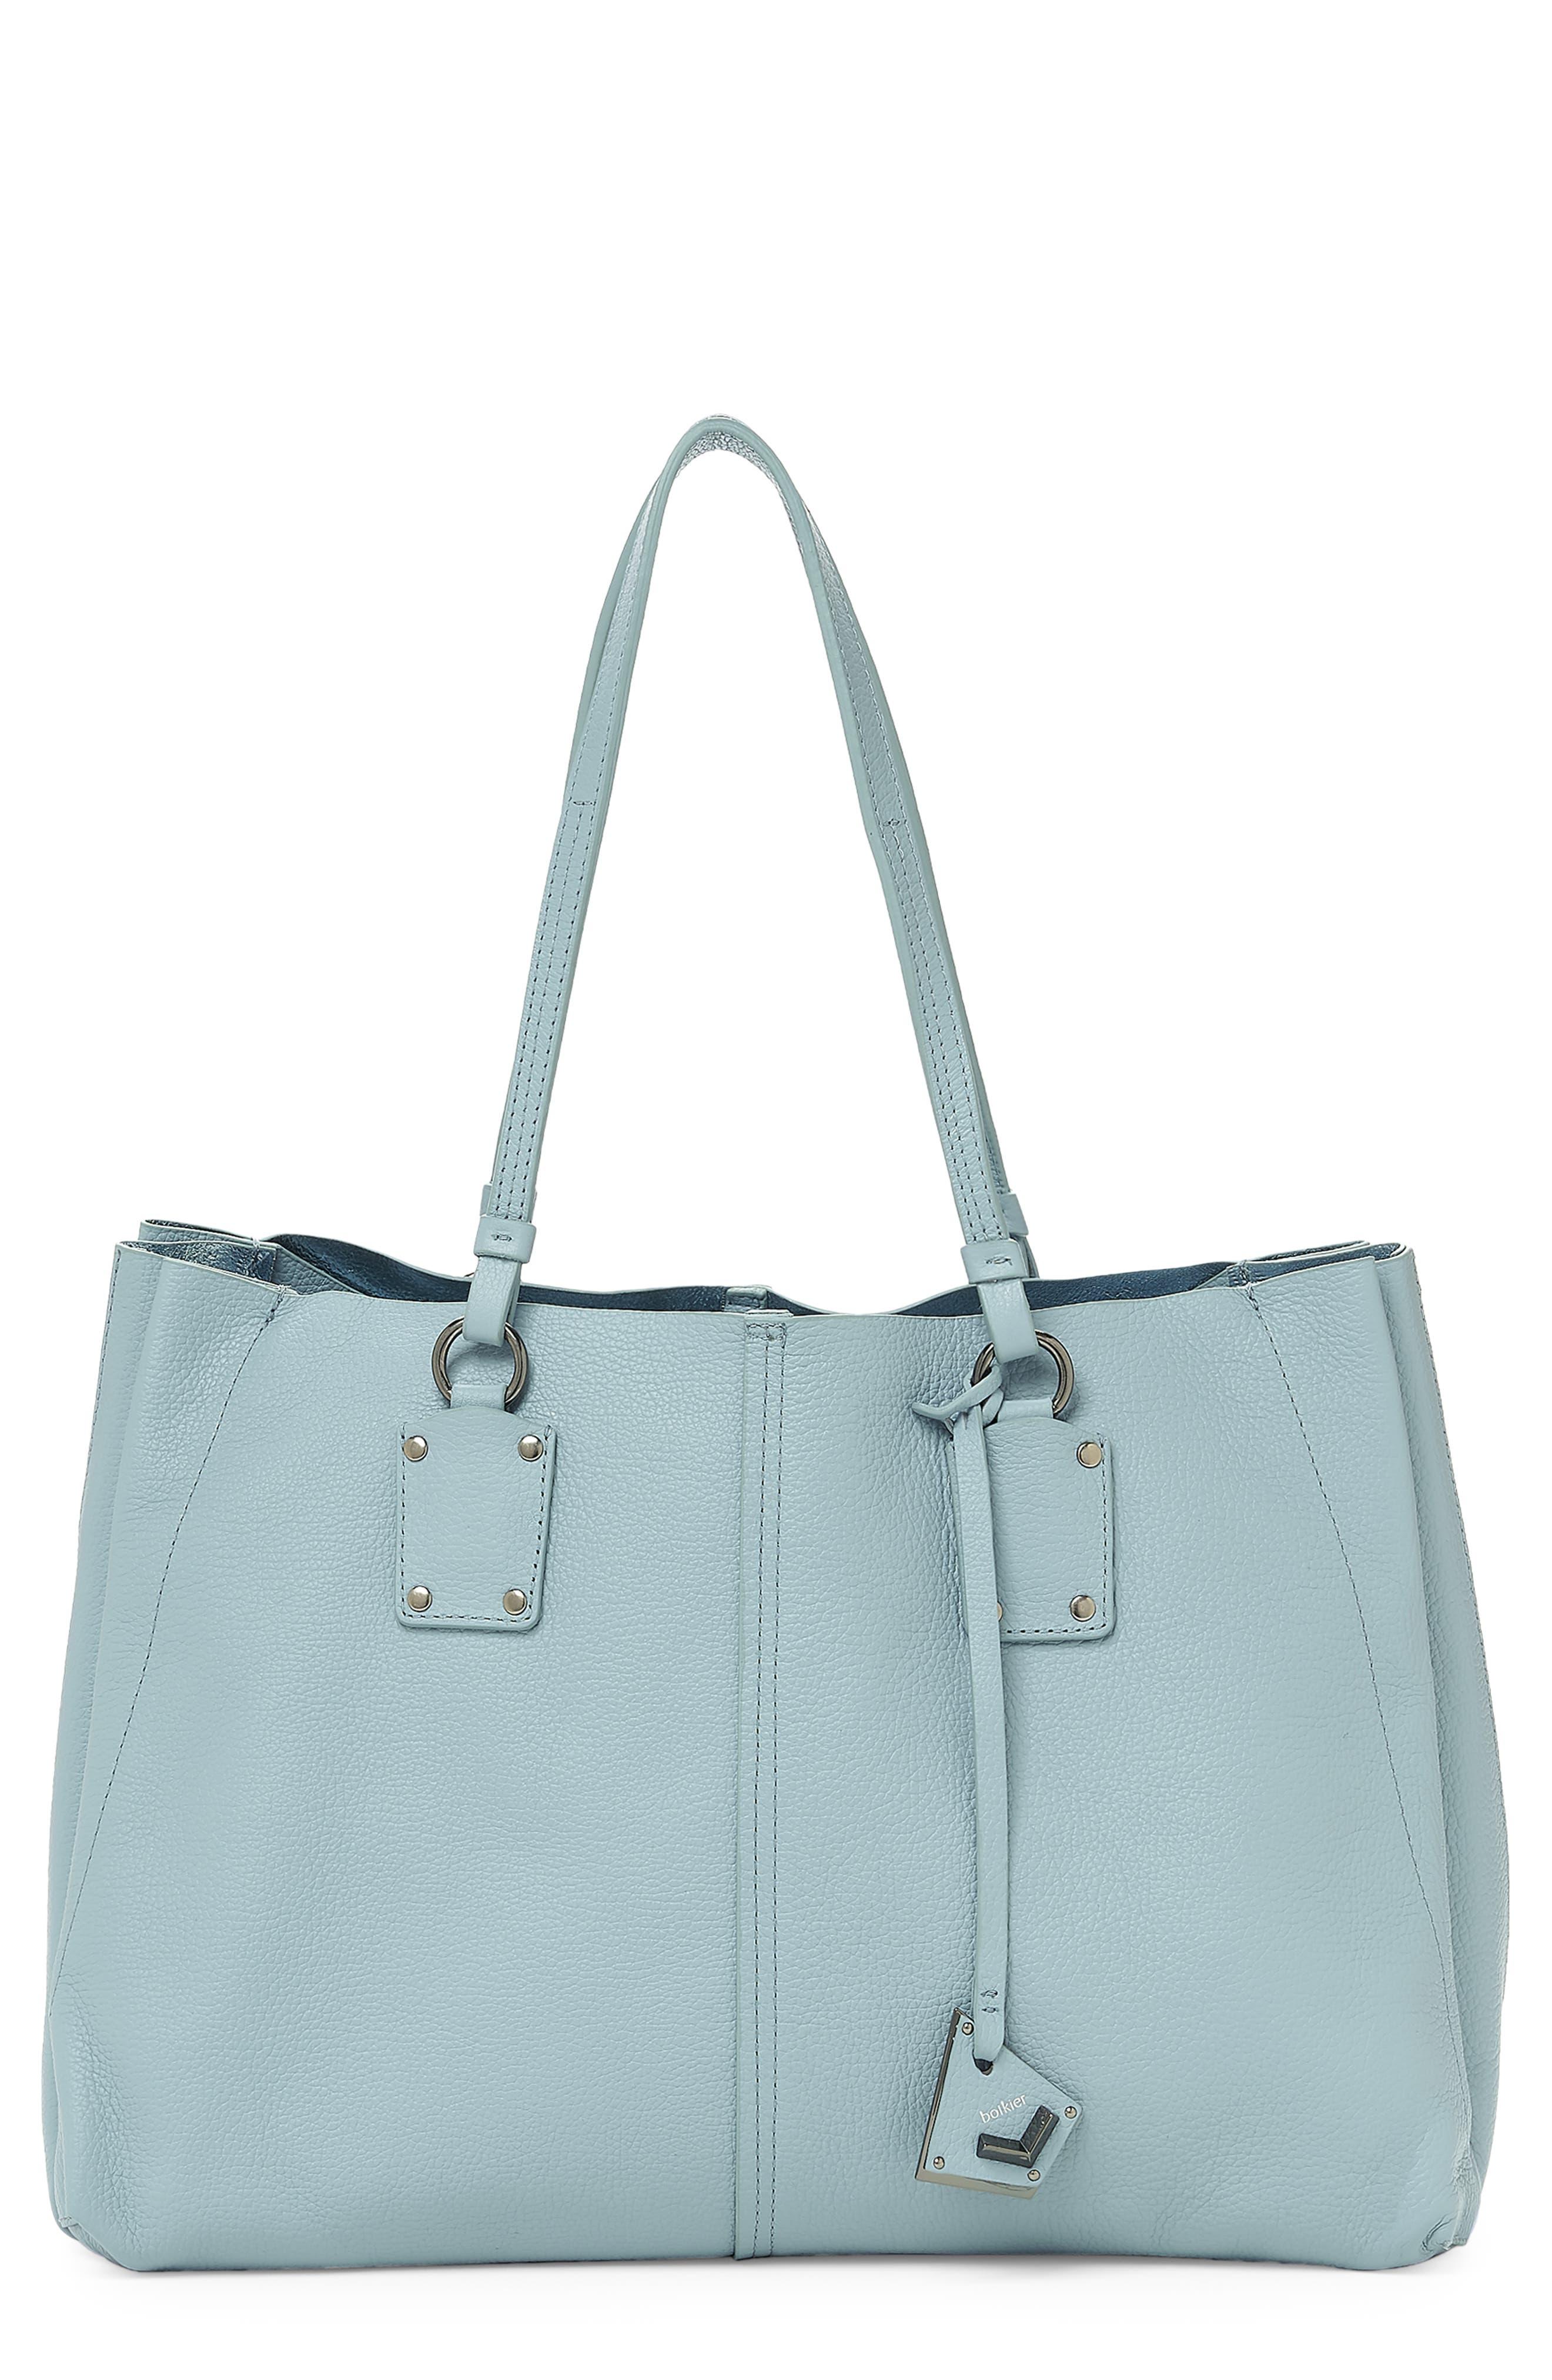 Botkier Ludlow Pebble Leather Tote in Blue | Lyst